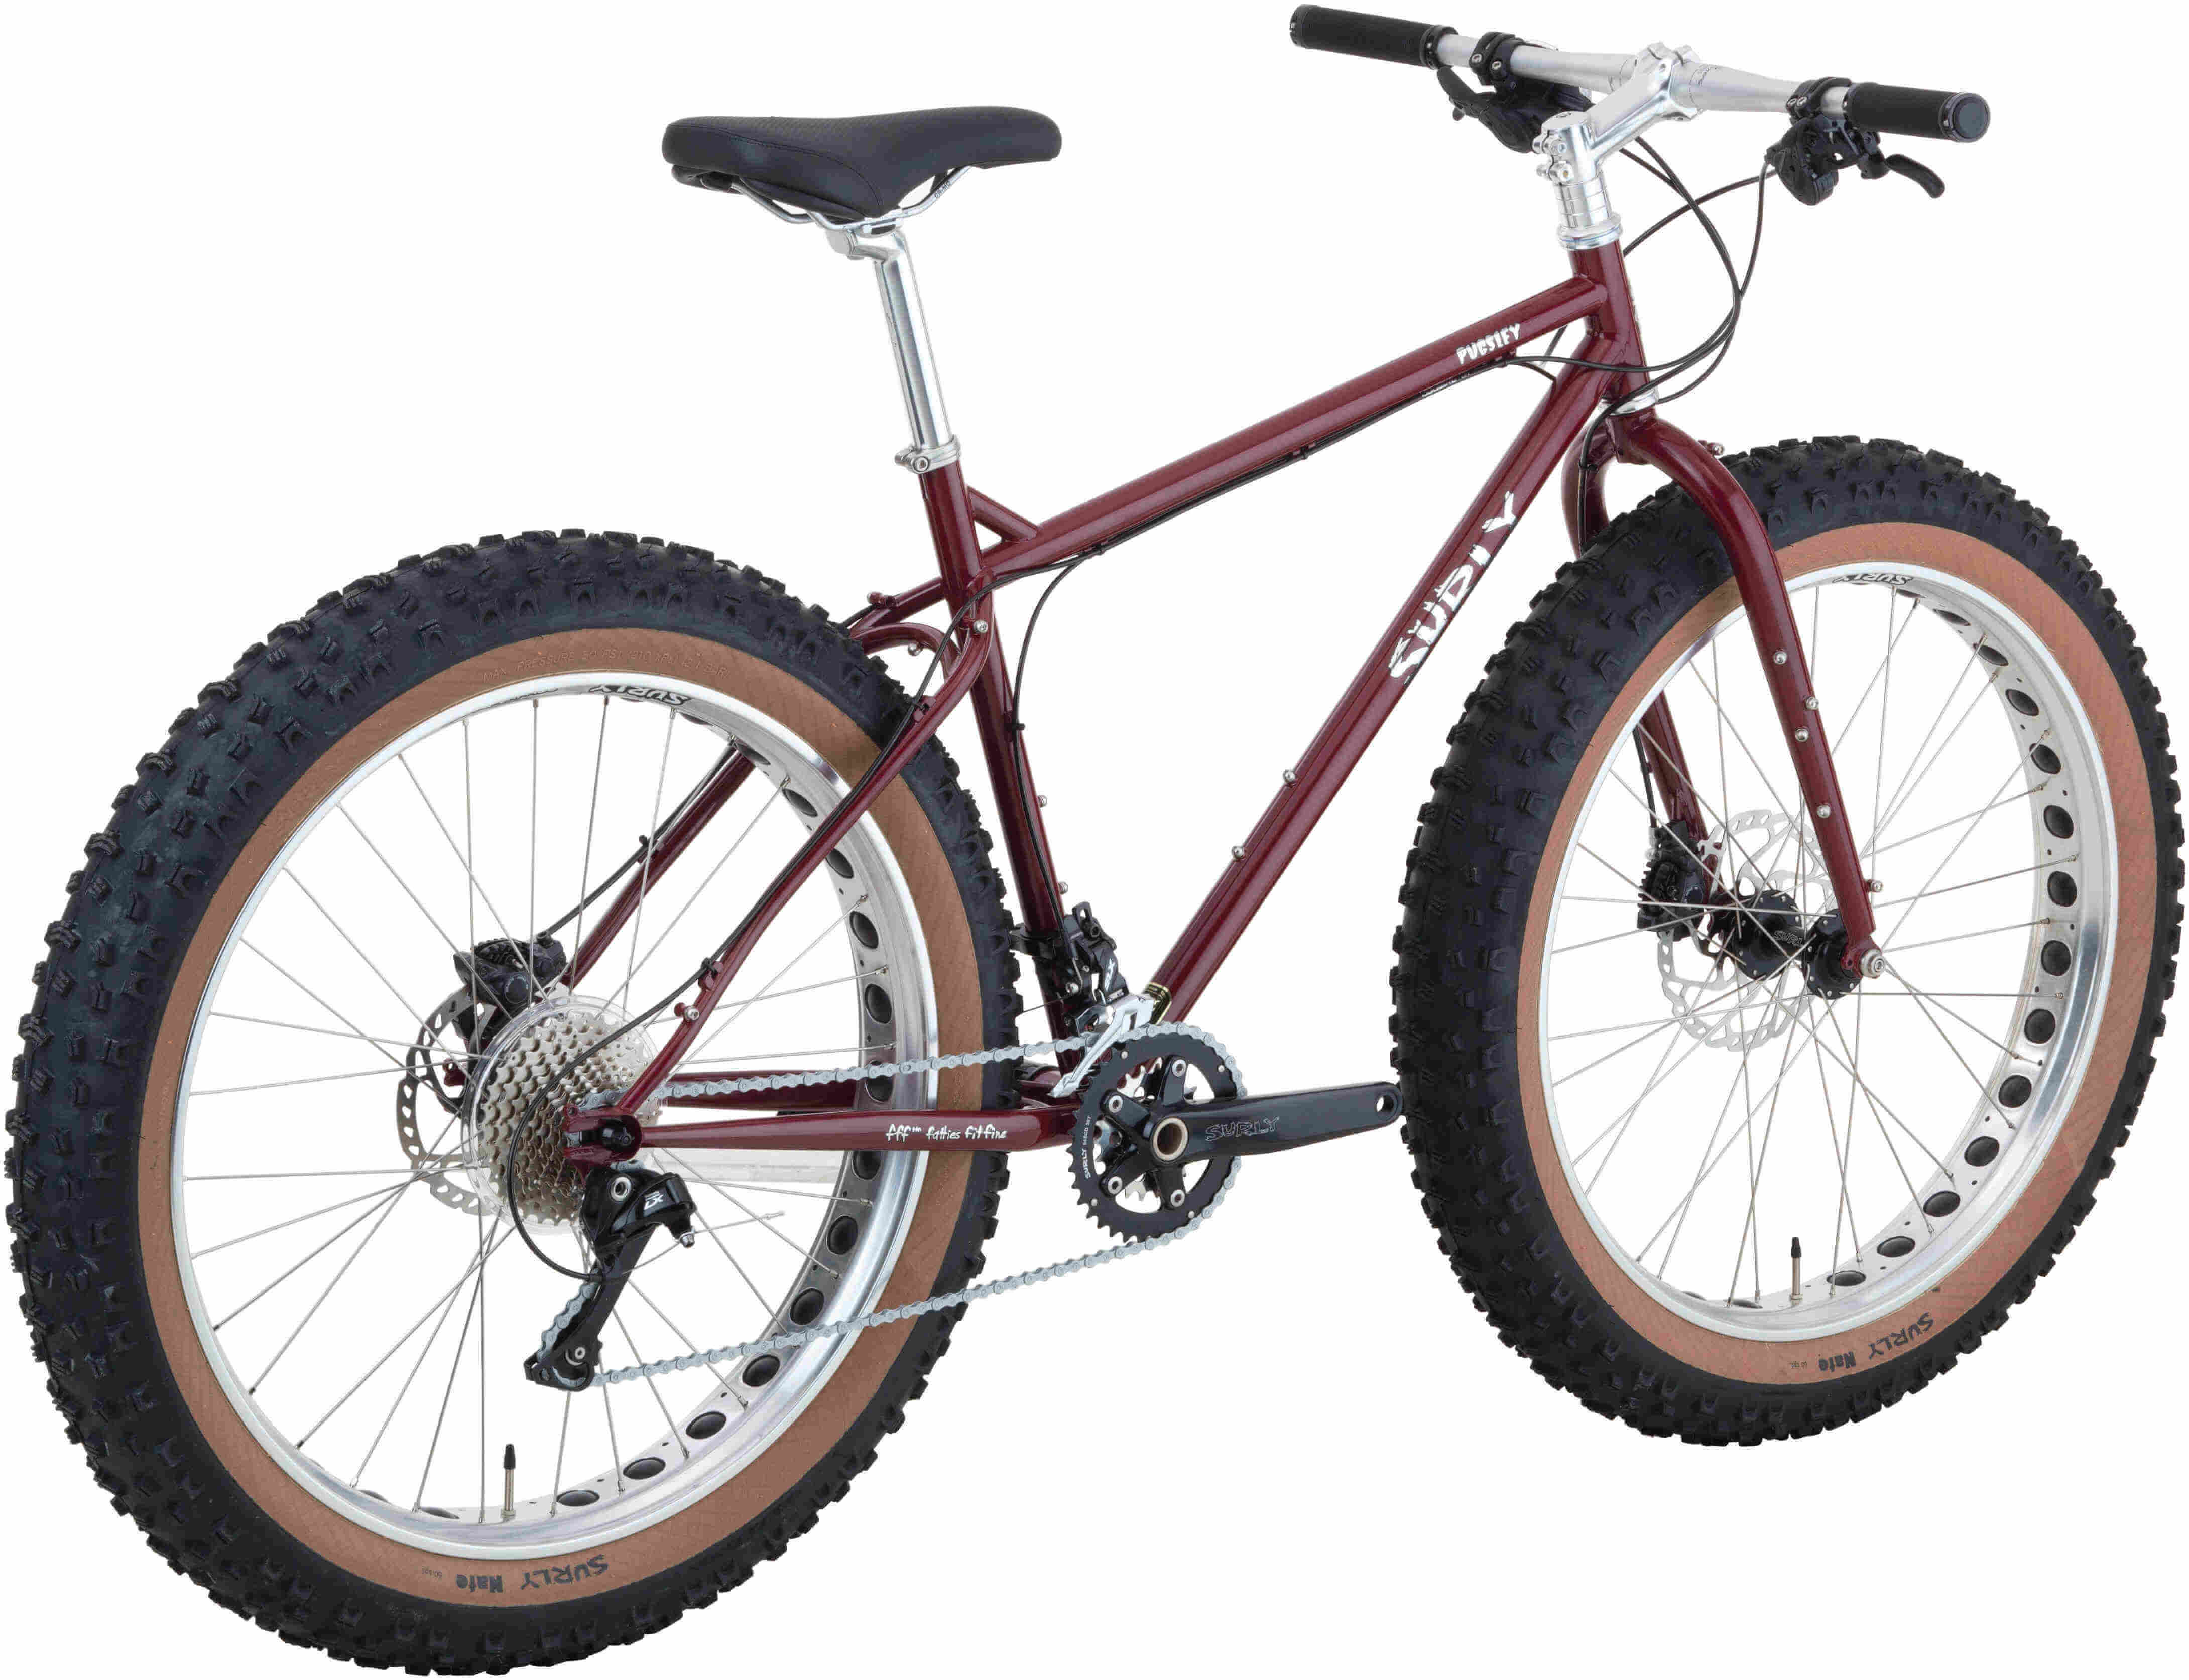 Surly Pugsley fat bike with gumwall tires - dark red - Rear, right side view with white background